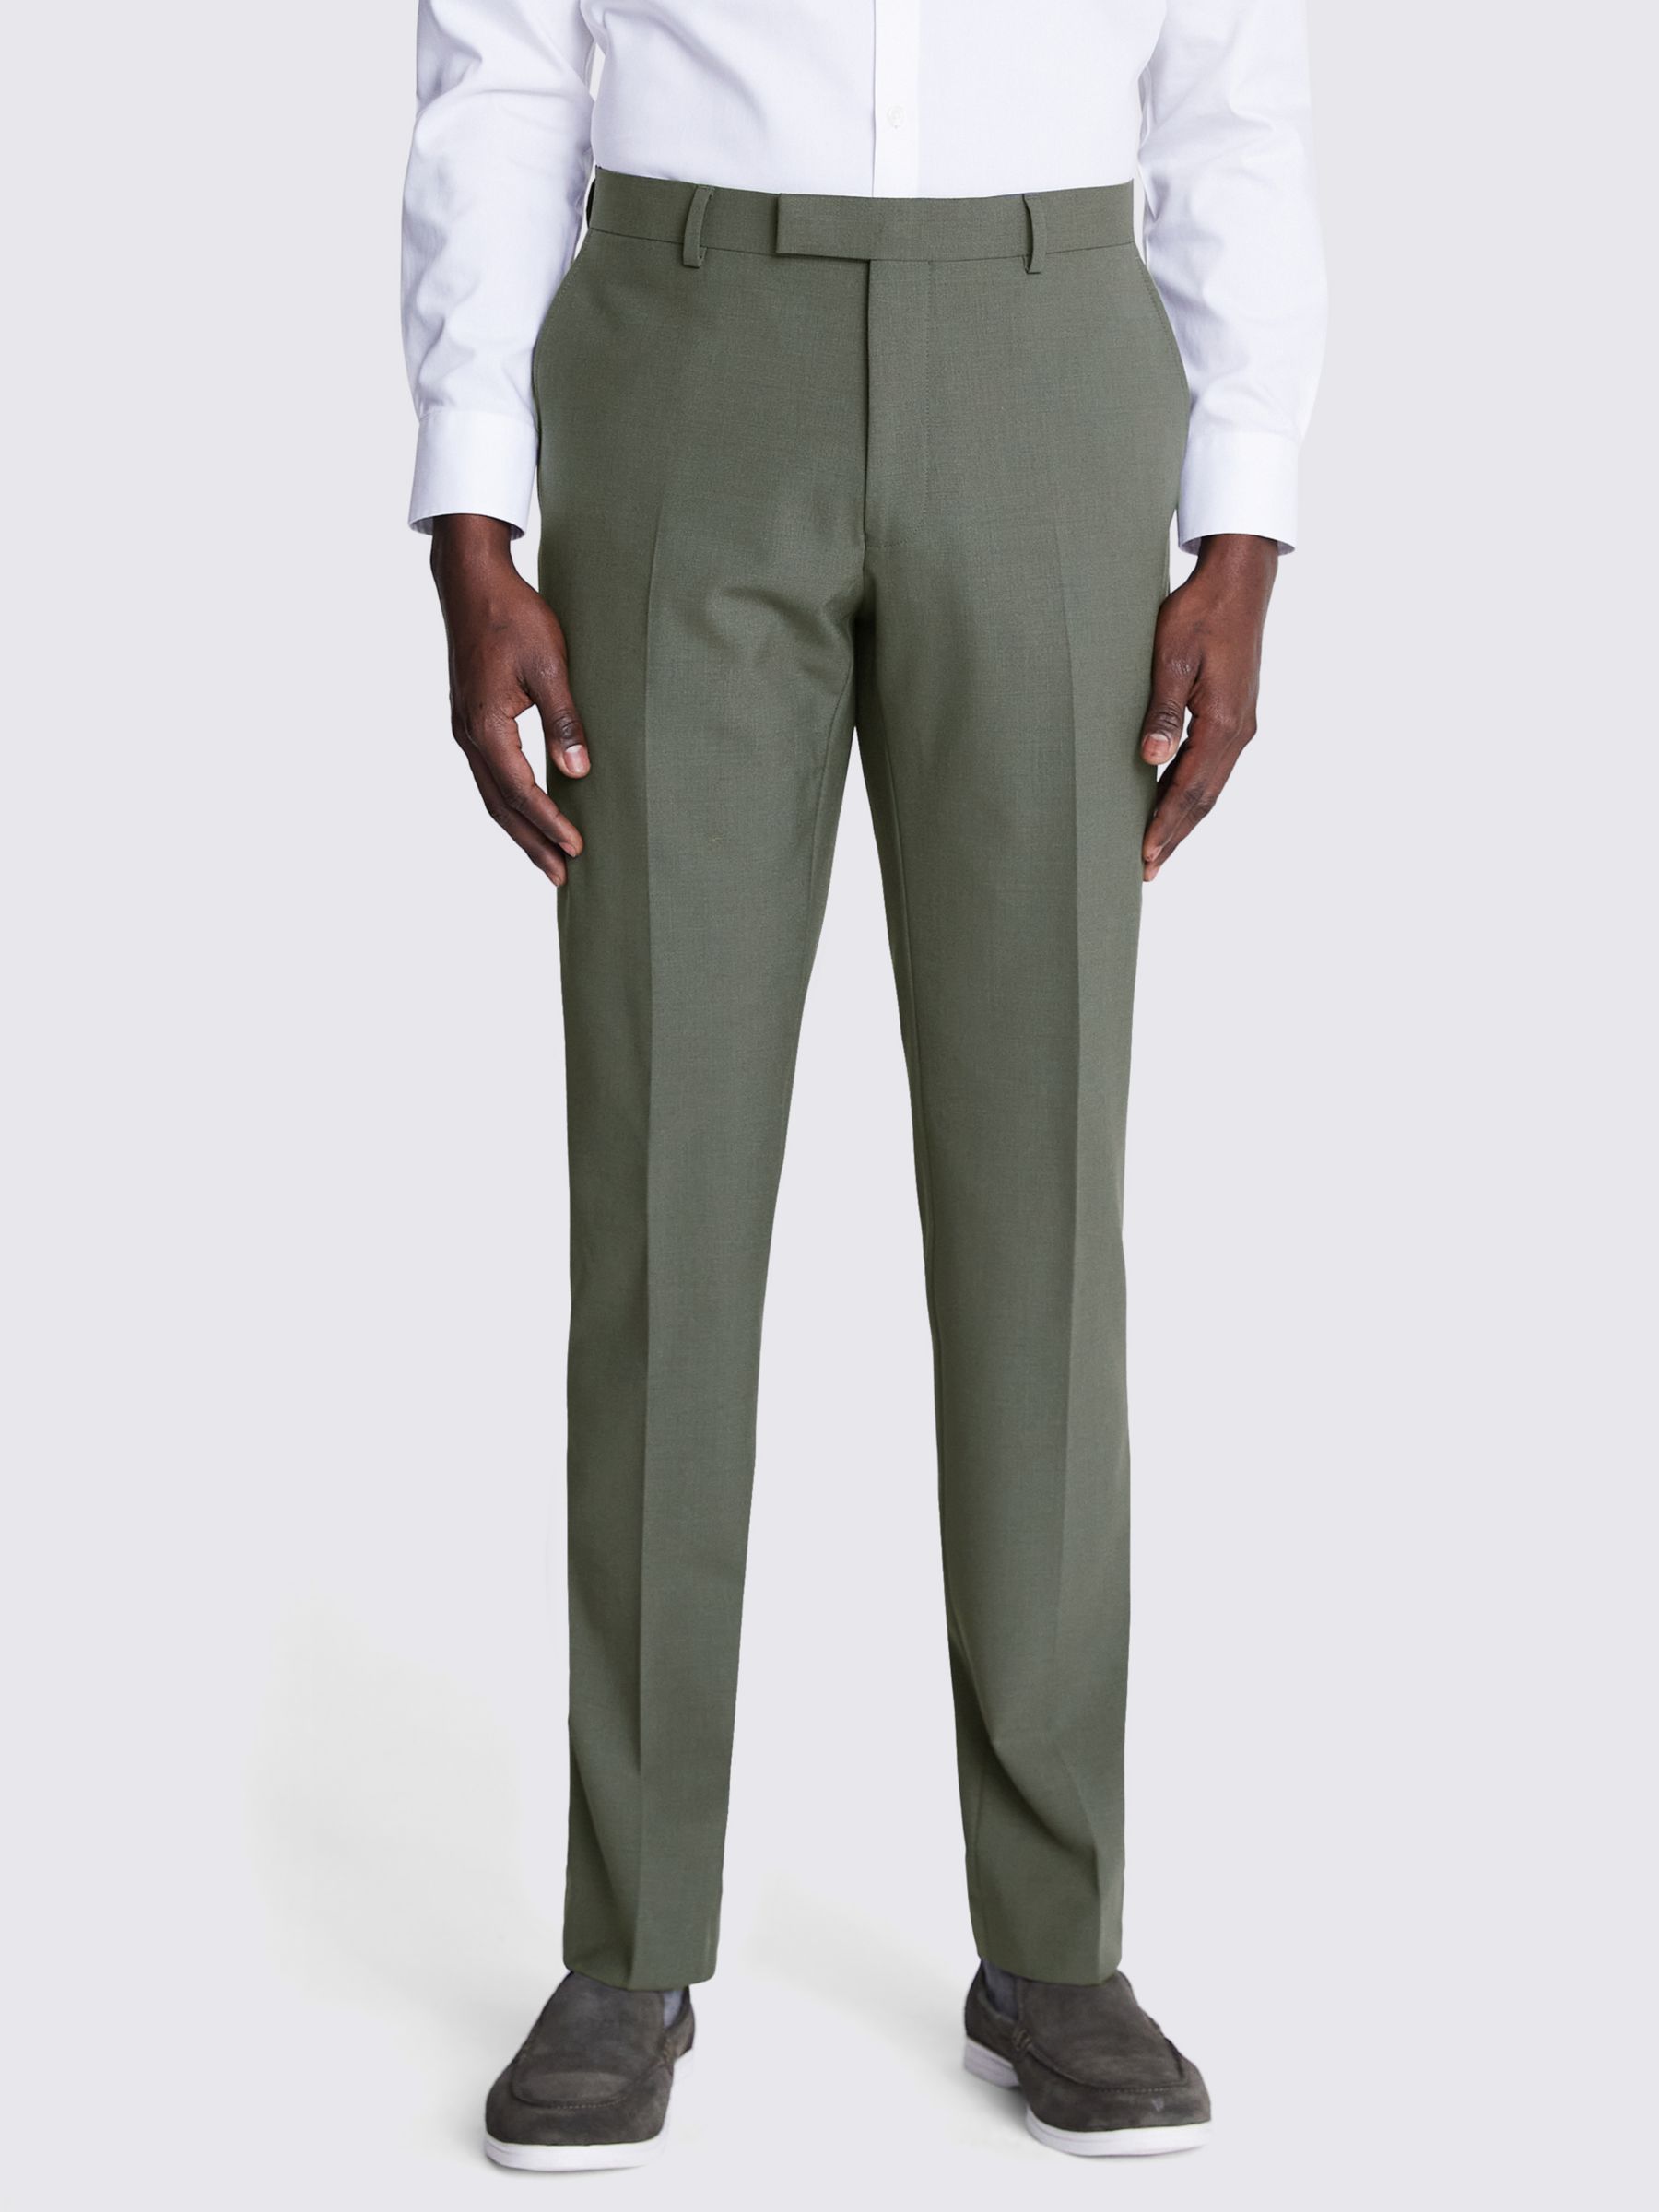 Buy Moss x DKNY Slim Fit Wool Blend Suit Trousers Online at johnlewis.com